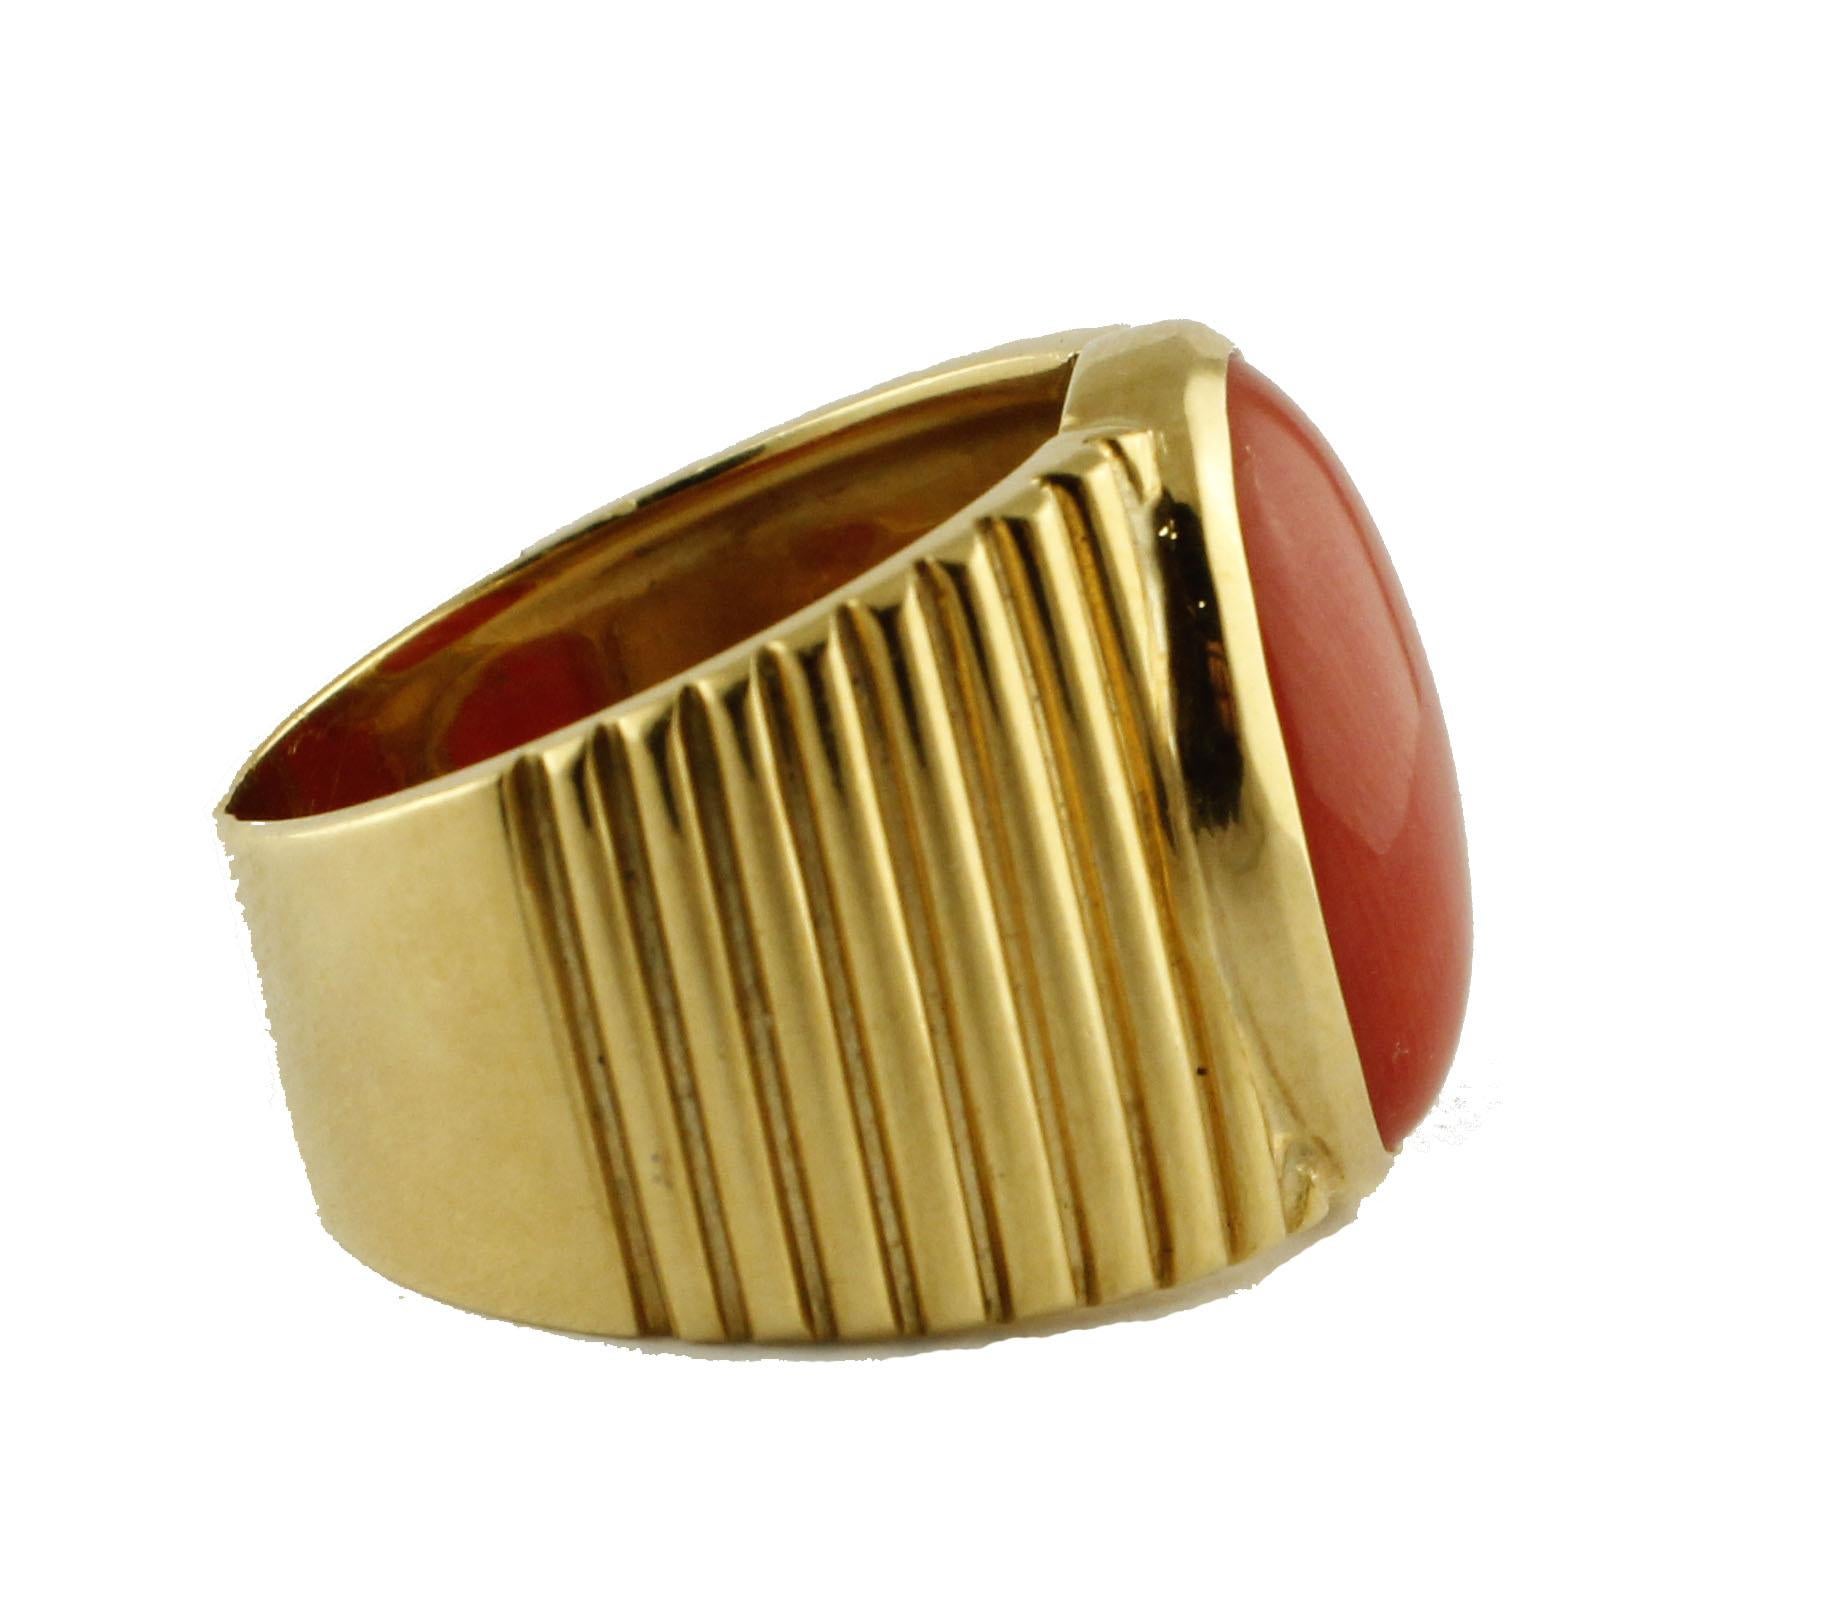 Simple in its shape this signet ring is also composed simply with a central oval coral, mounted on 18 Kt yellow gold.
Ring Size: ITA 13 - French 53 - US 6.5 - UK N
Tot weight 12.7 gr
Coral 1.80 gr

Rf. uagh

We hereby inform our customers that in